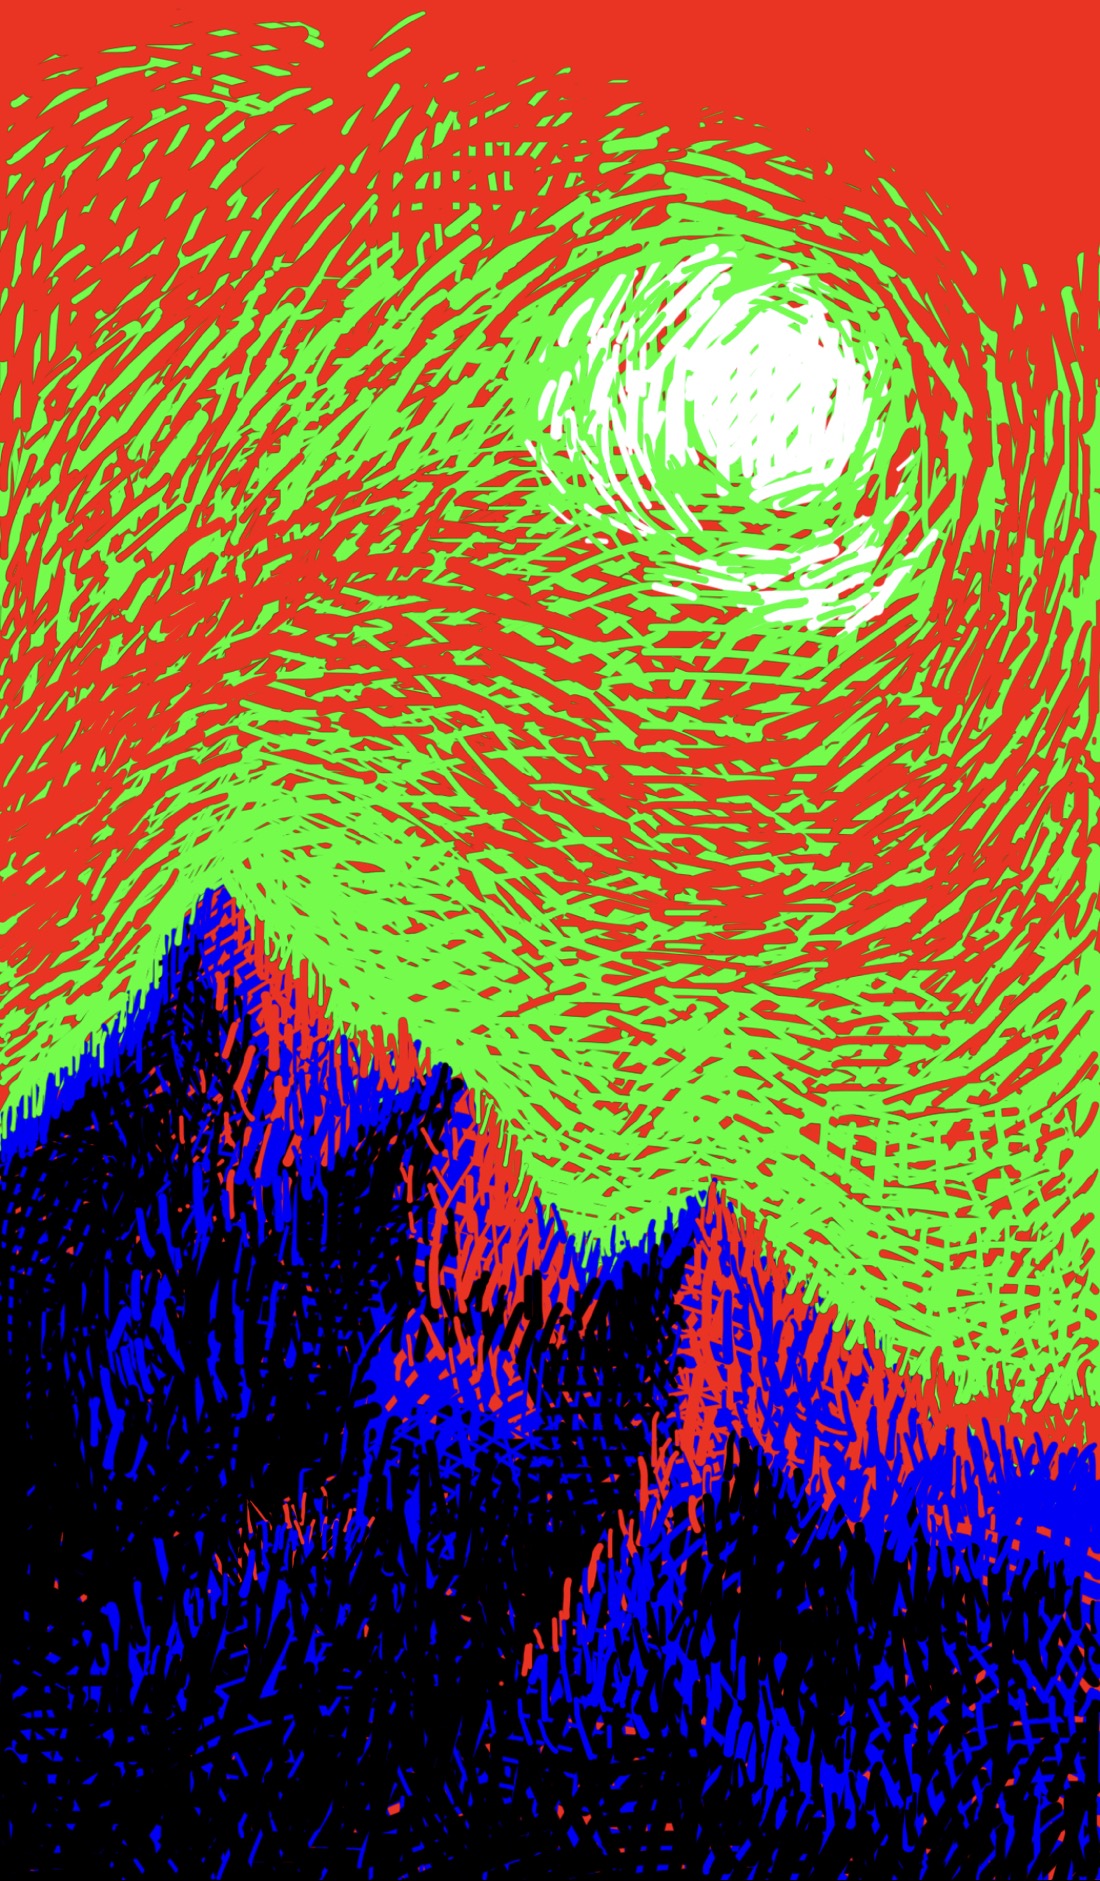 A sun blazes over a mountain valley. On the left side of the drawing, sloping down towards the right, are a series of mountain peaks, the ridgeline highlighted in red. The sky itself is a garish, impressionist blend of red and green. The sun is white. The shaded part of the mountains are black and blue. The drawing is rendered in a rough, impressionist texture, suggesting either a woodcut or heavy brushstrokes.